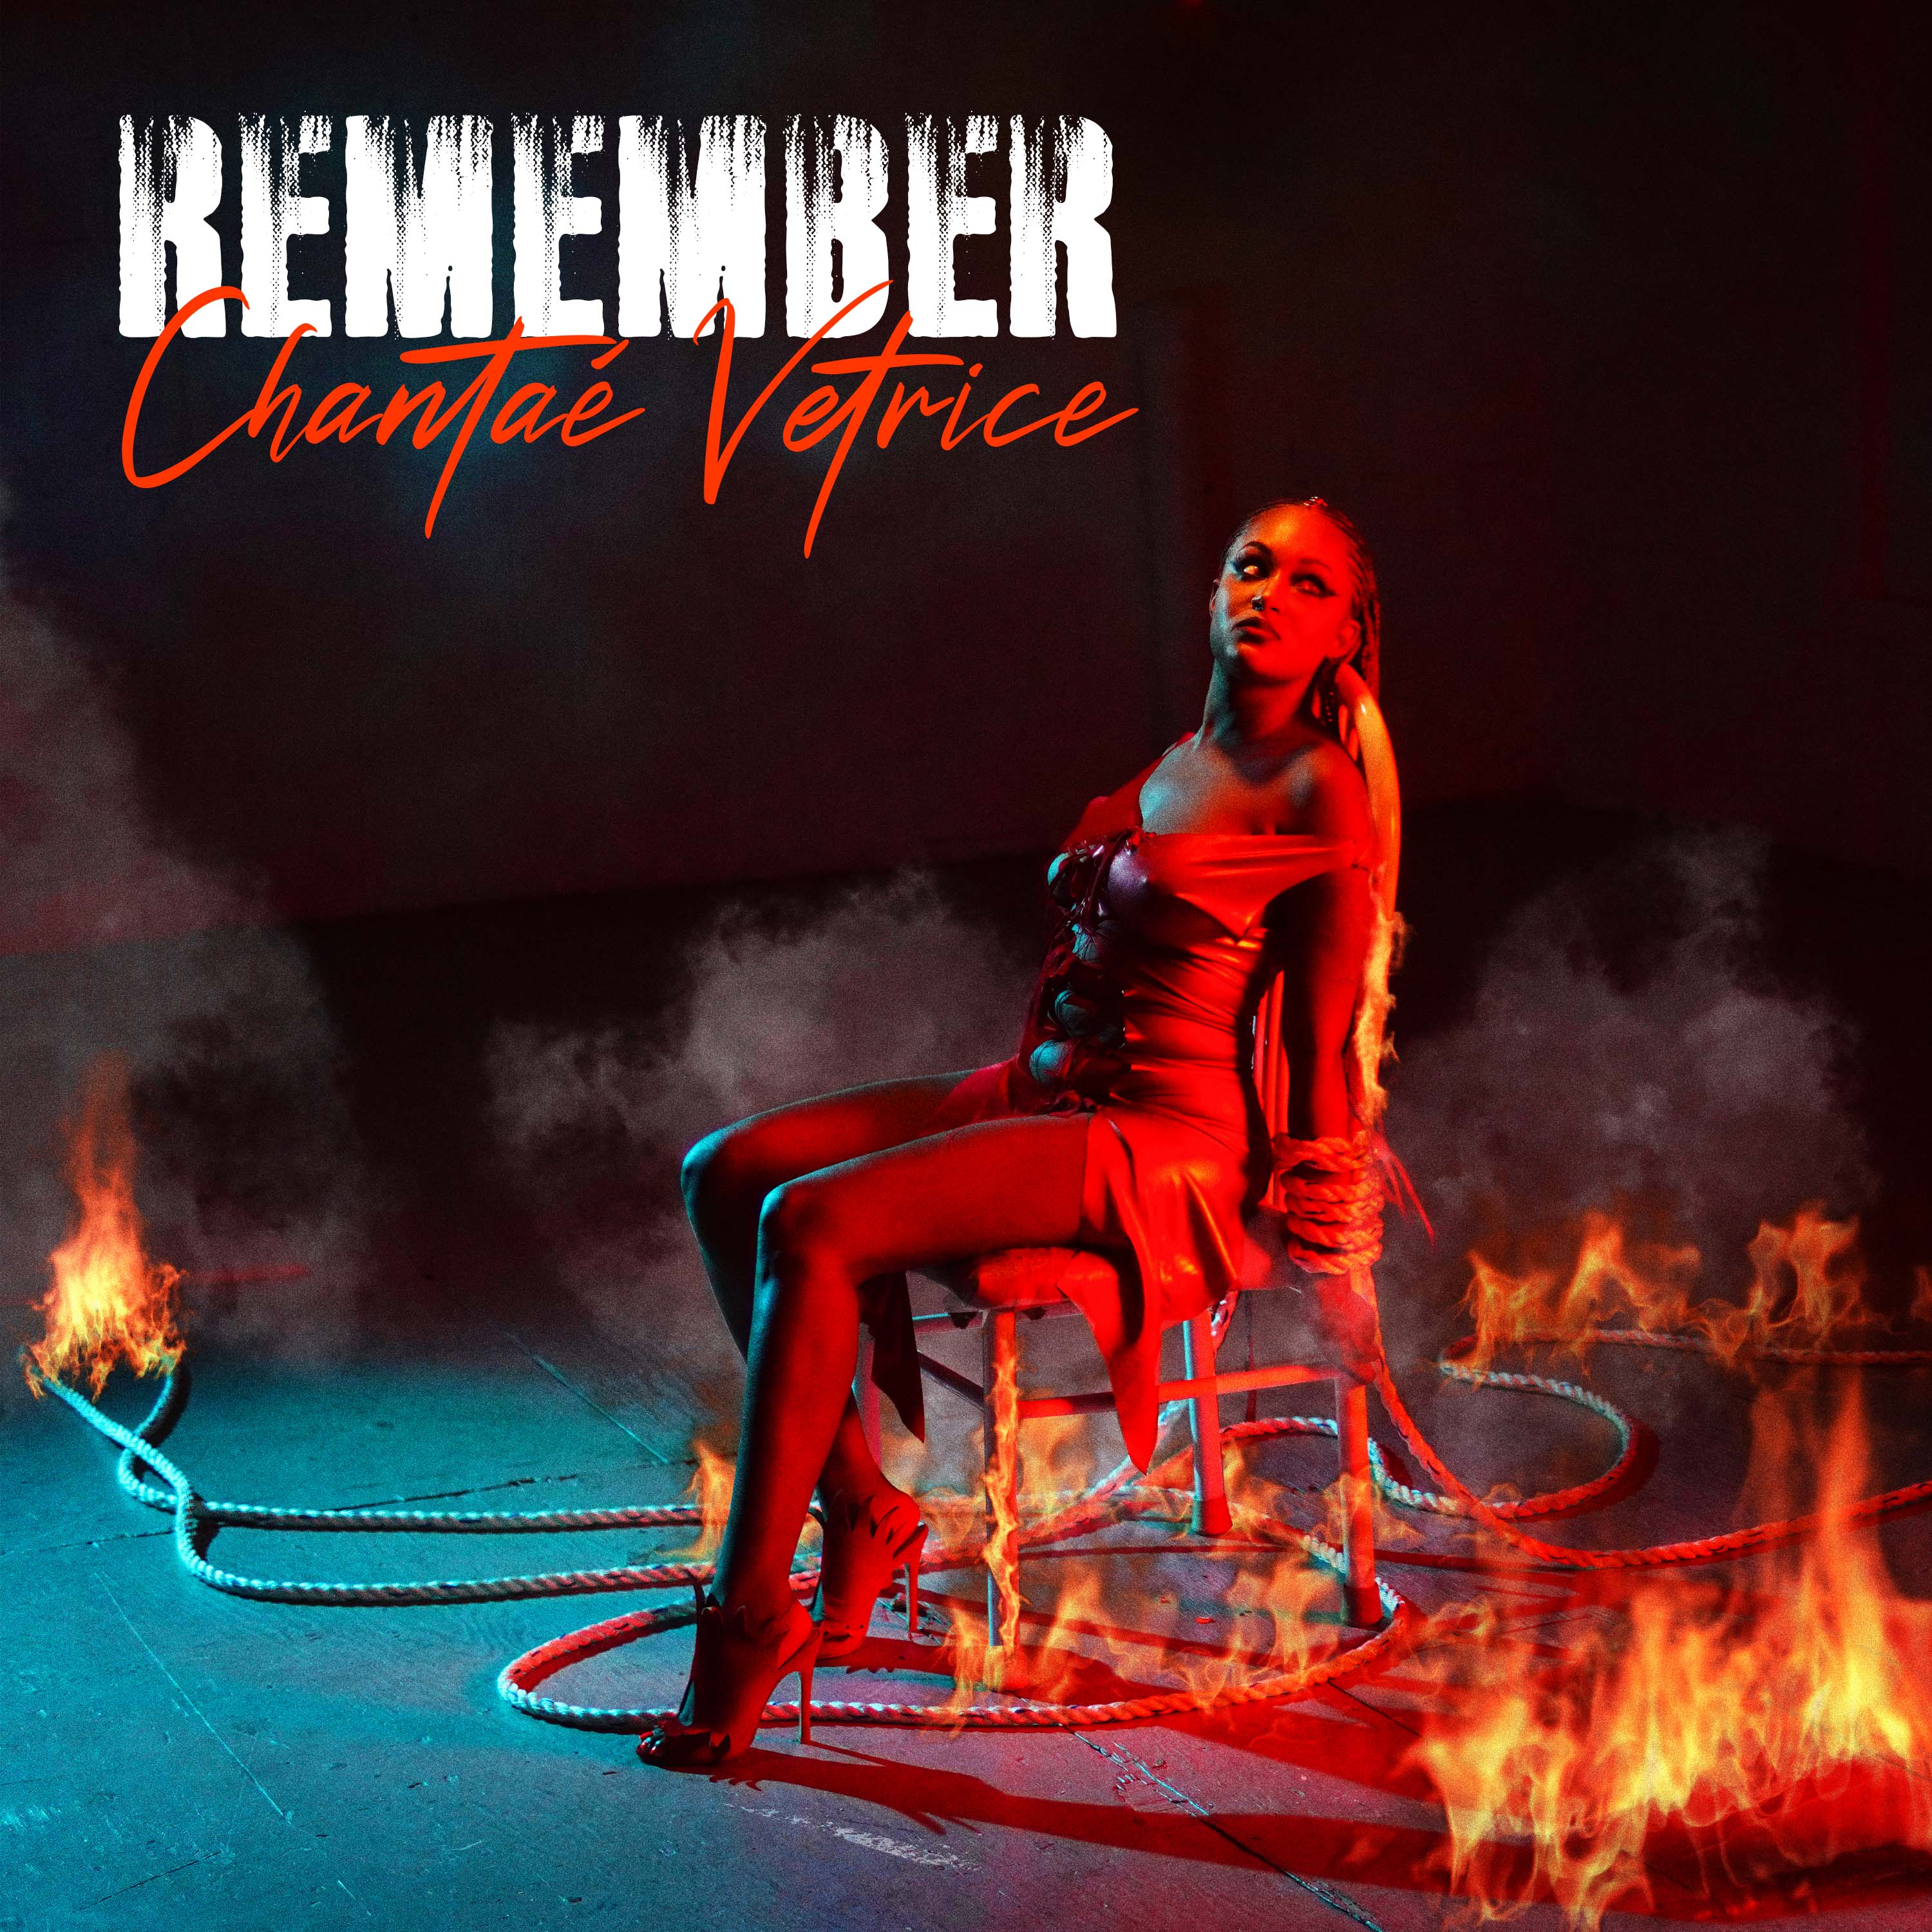 CHANTAE' VETRICE - REMEMBER [OFFICIAL MUSIC VIDEO]